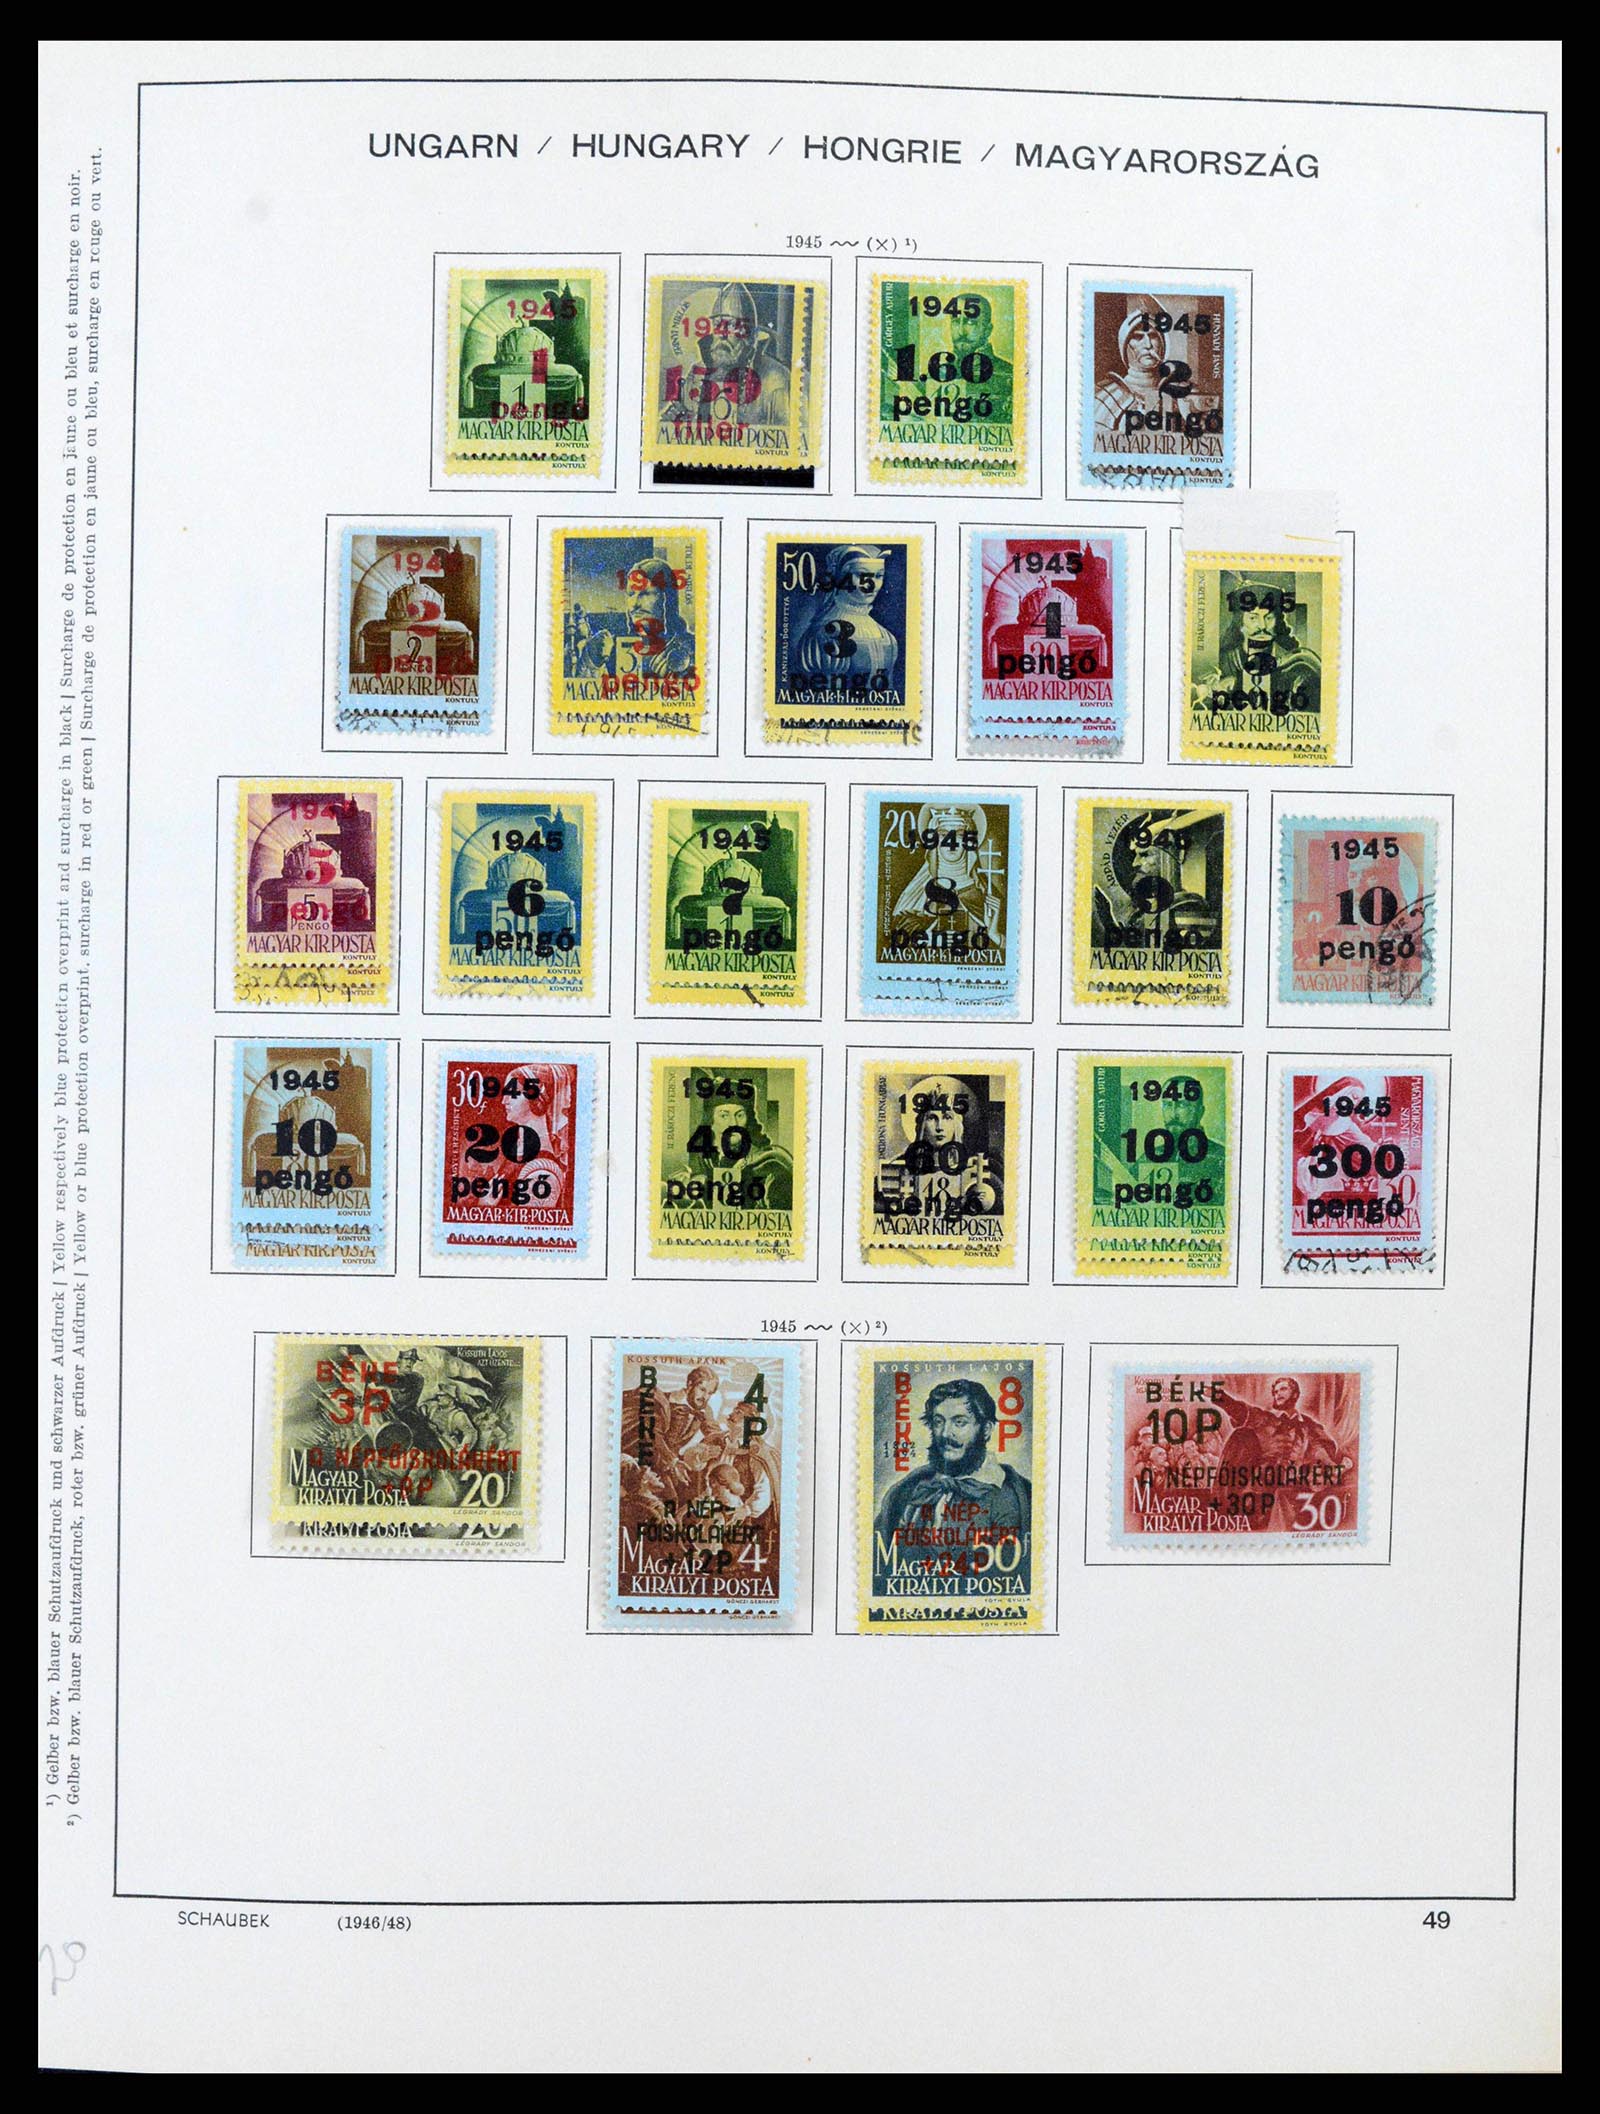 38953 0053 - Stamp collection 38953 Hungary 1873-1995.